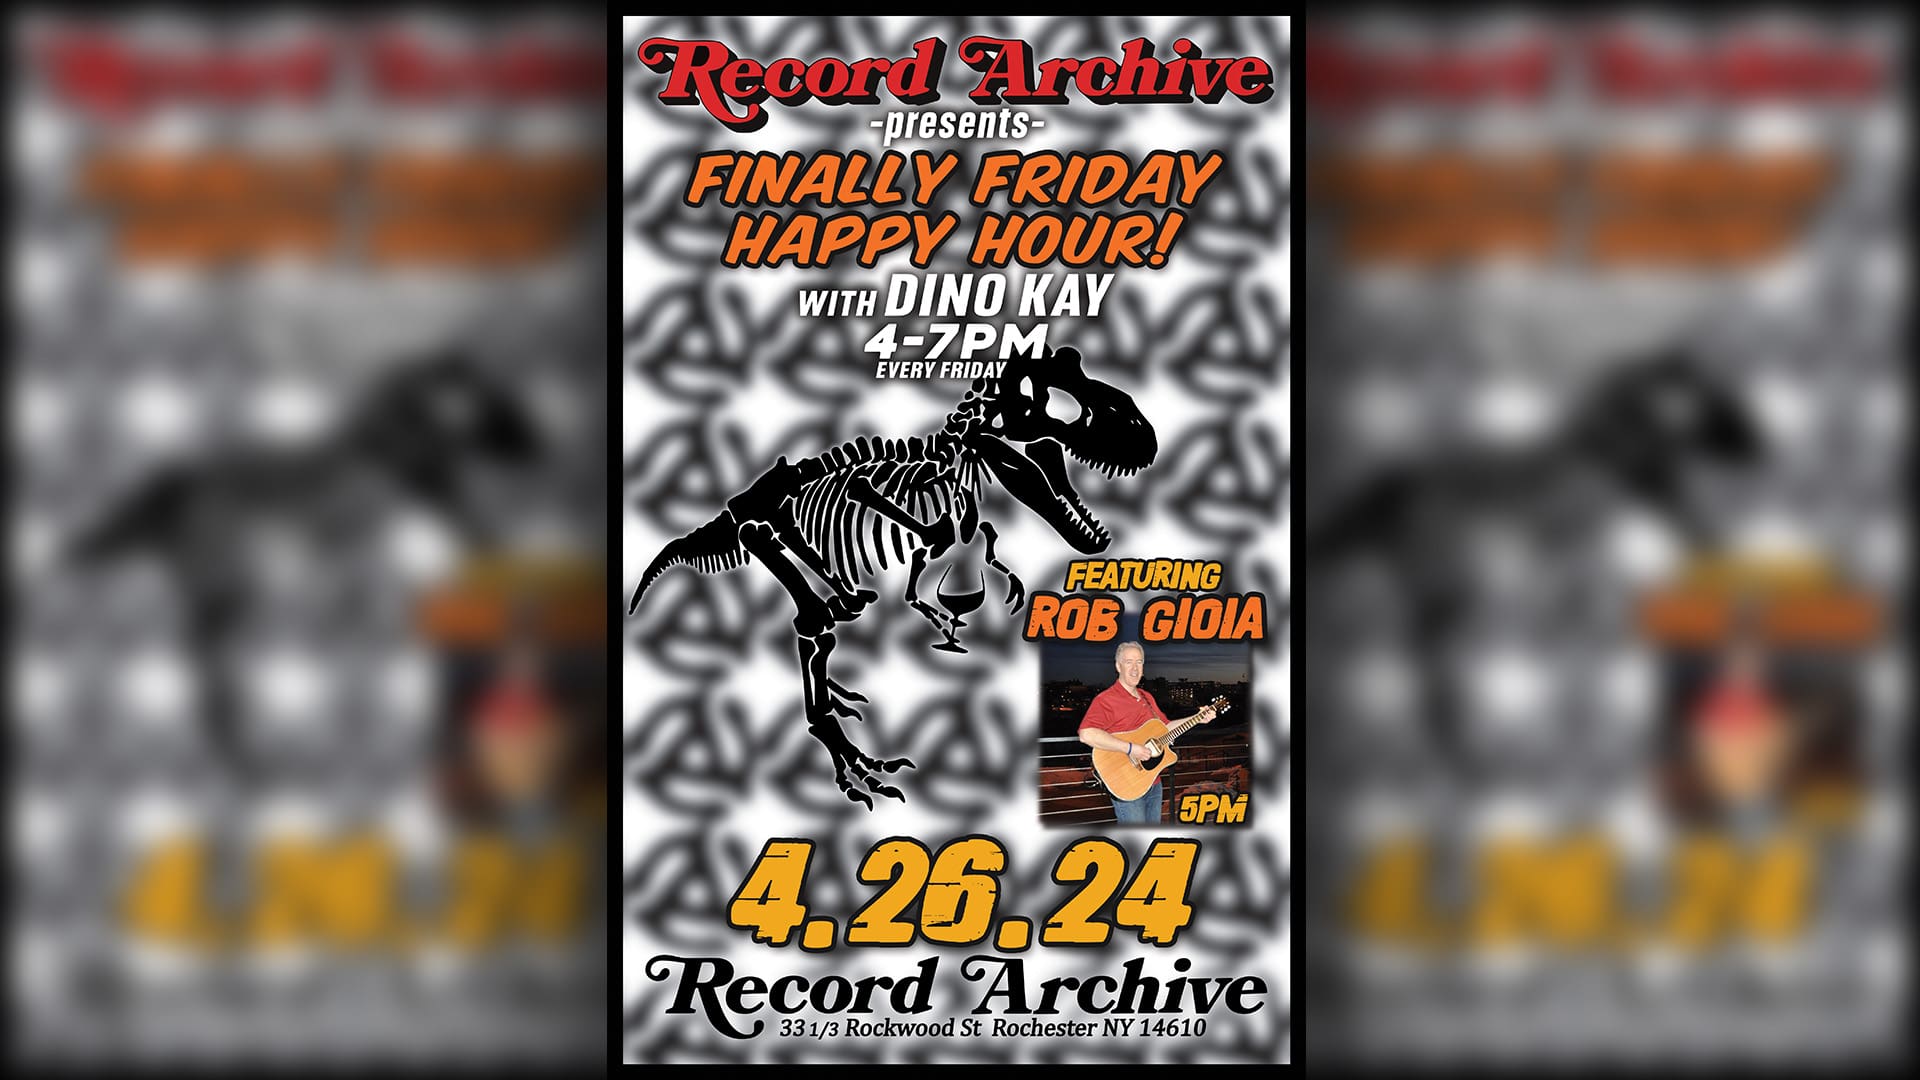 Record Archive presents Finally Friday Happy Hour. With Dino Kay every Friday 4-7pm. Featuring Rob Gioia. 4.26.24. Record Archive 33 1/3 Rockwood St Rochester NY 14610